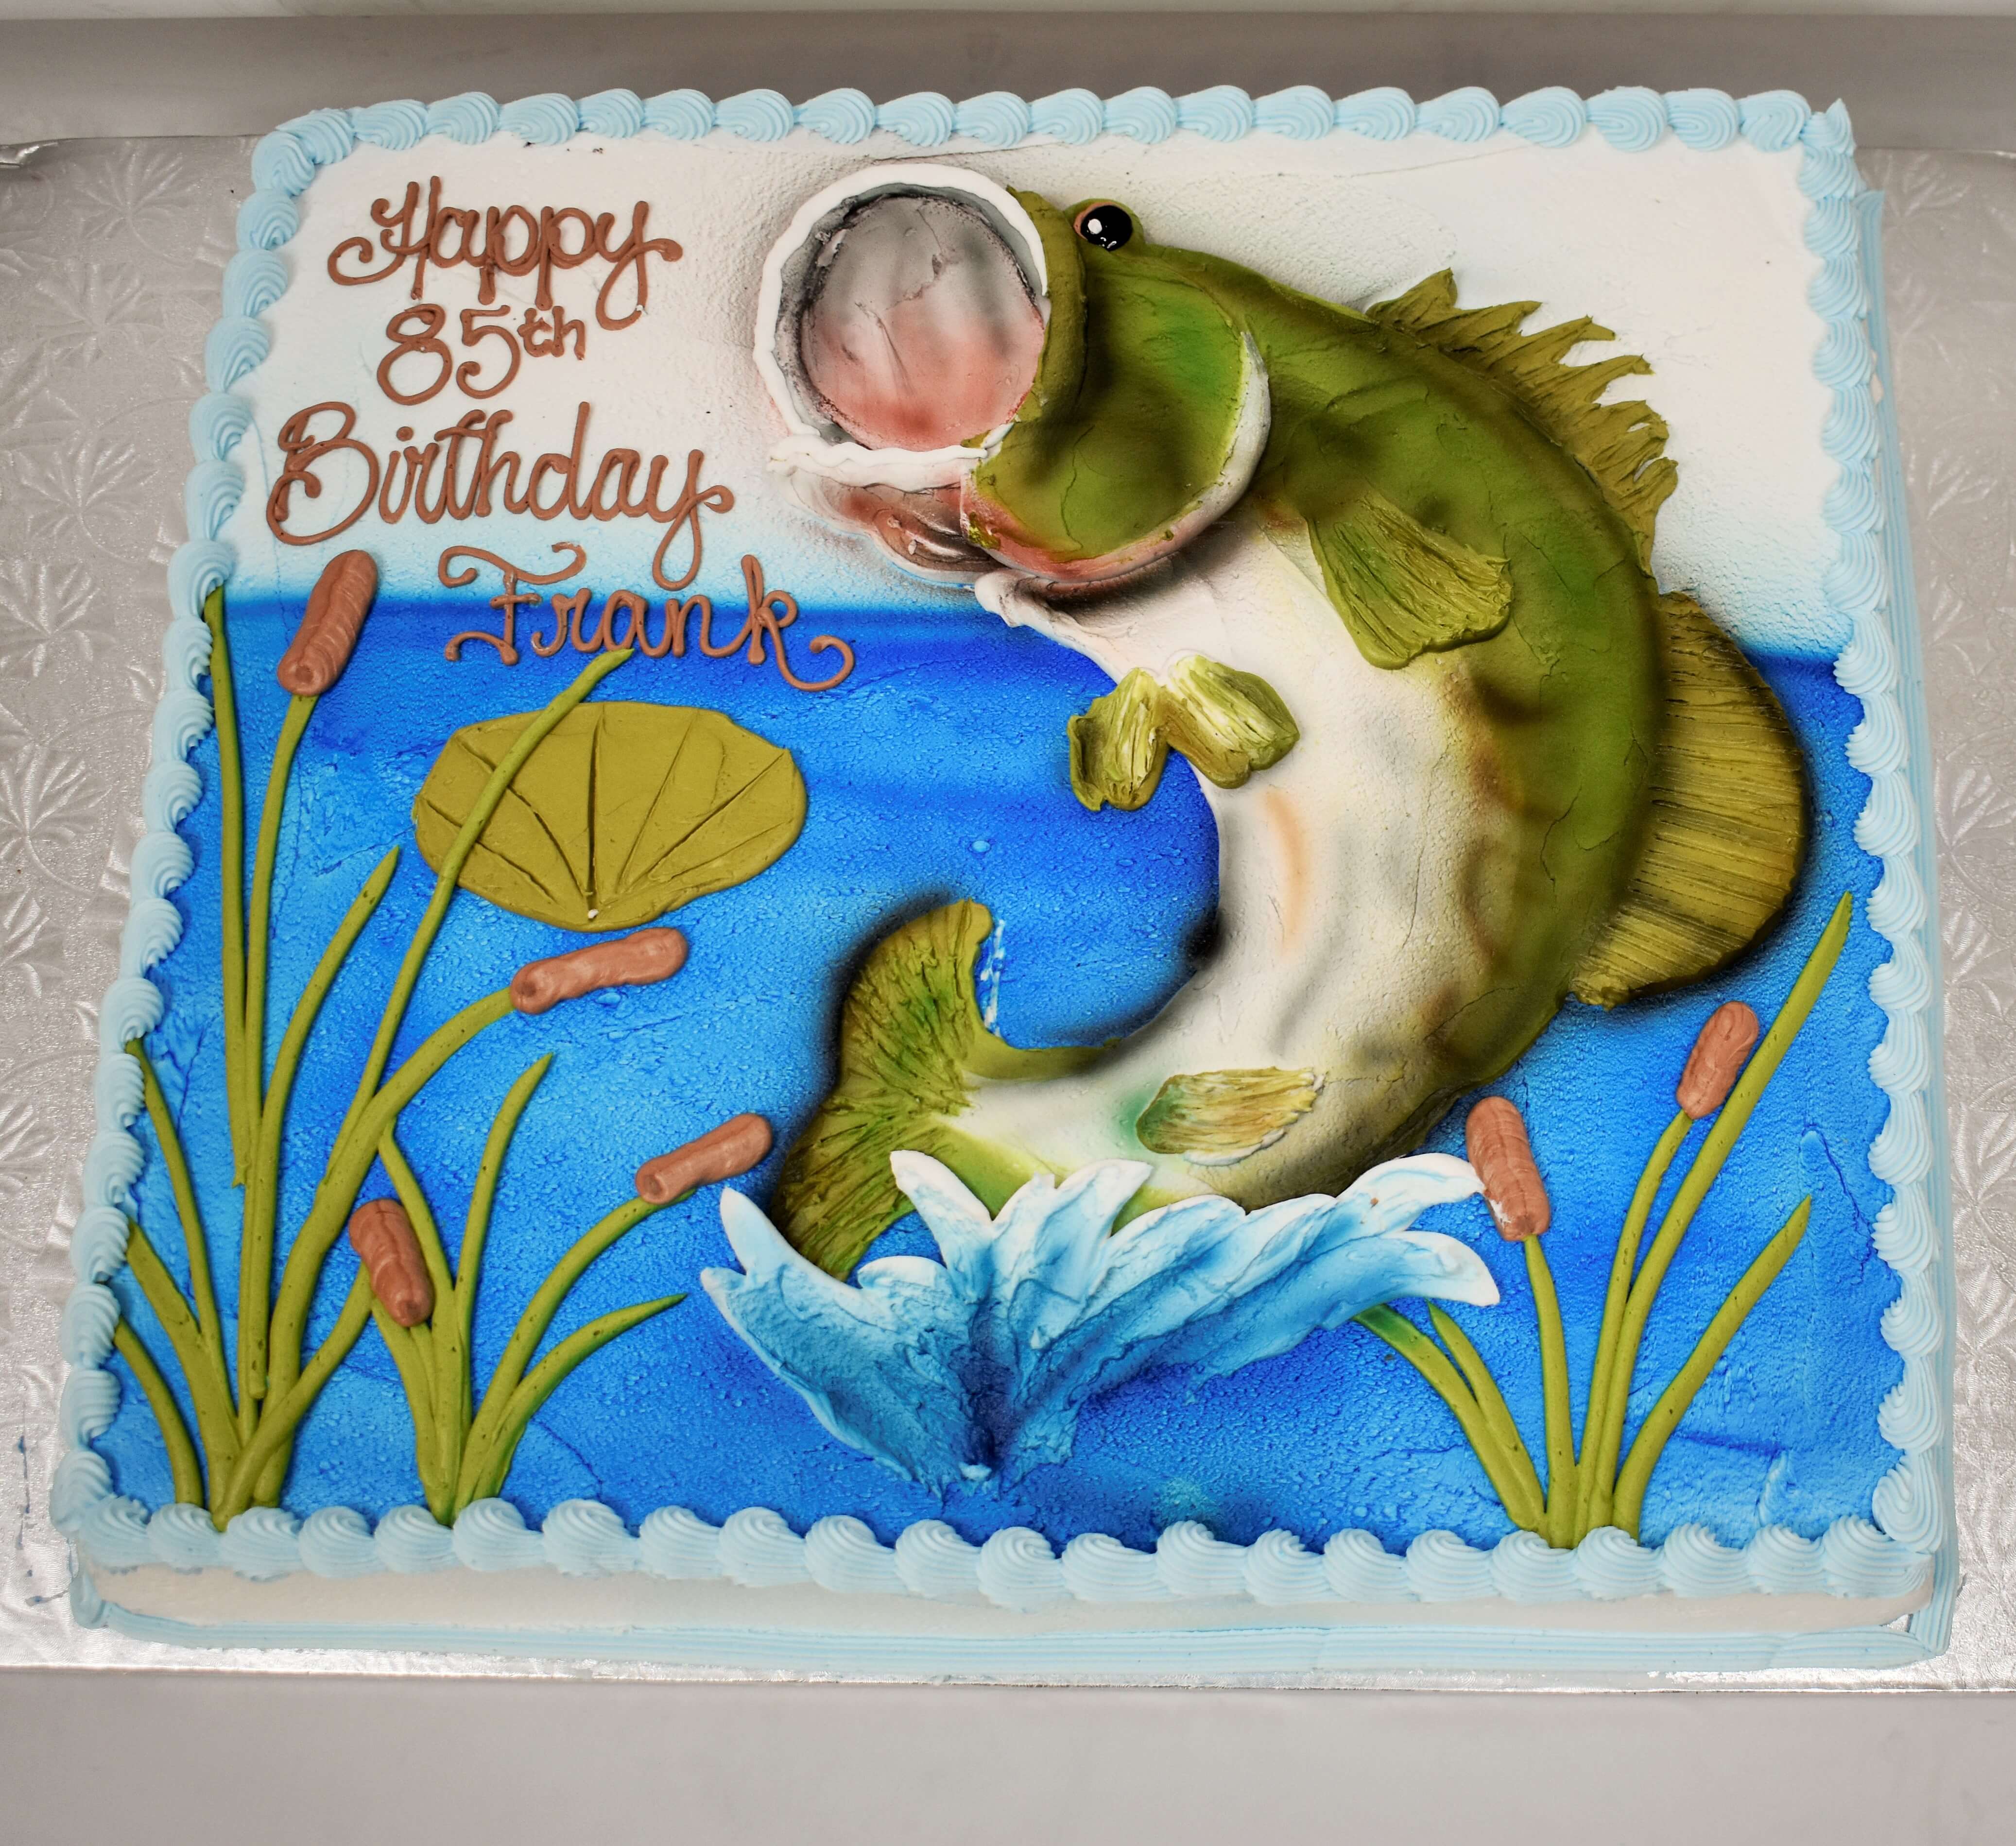 McArthur's Bakery Custom Cake with Large Mouth Bass, Plants.